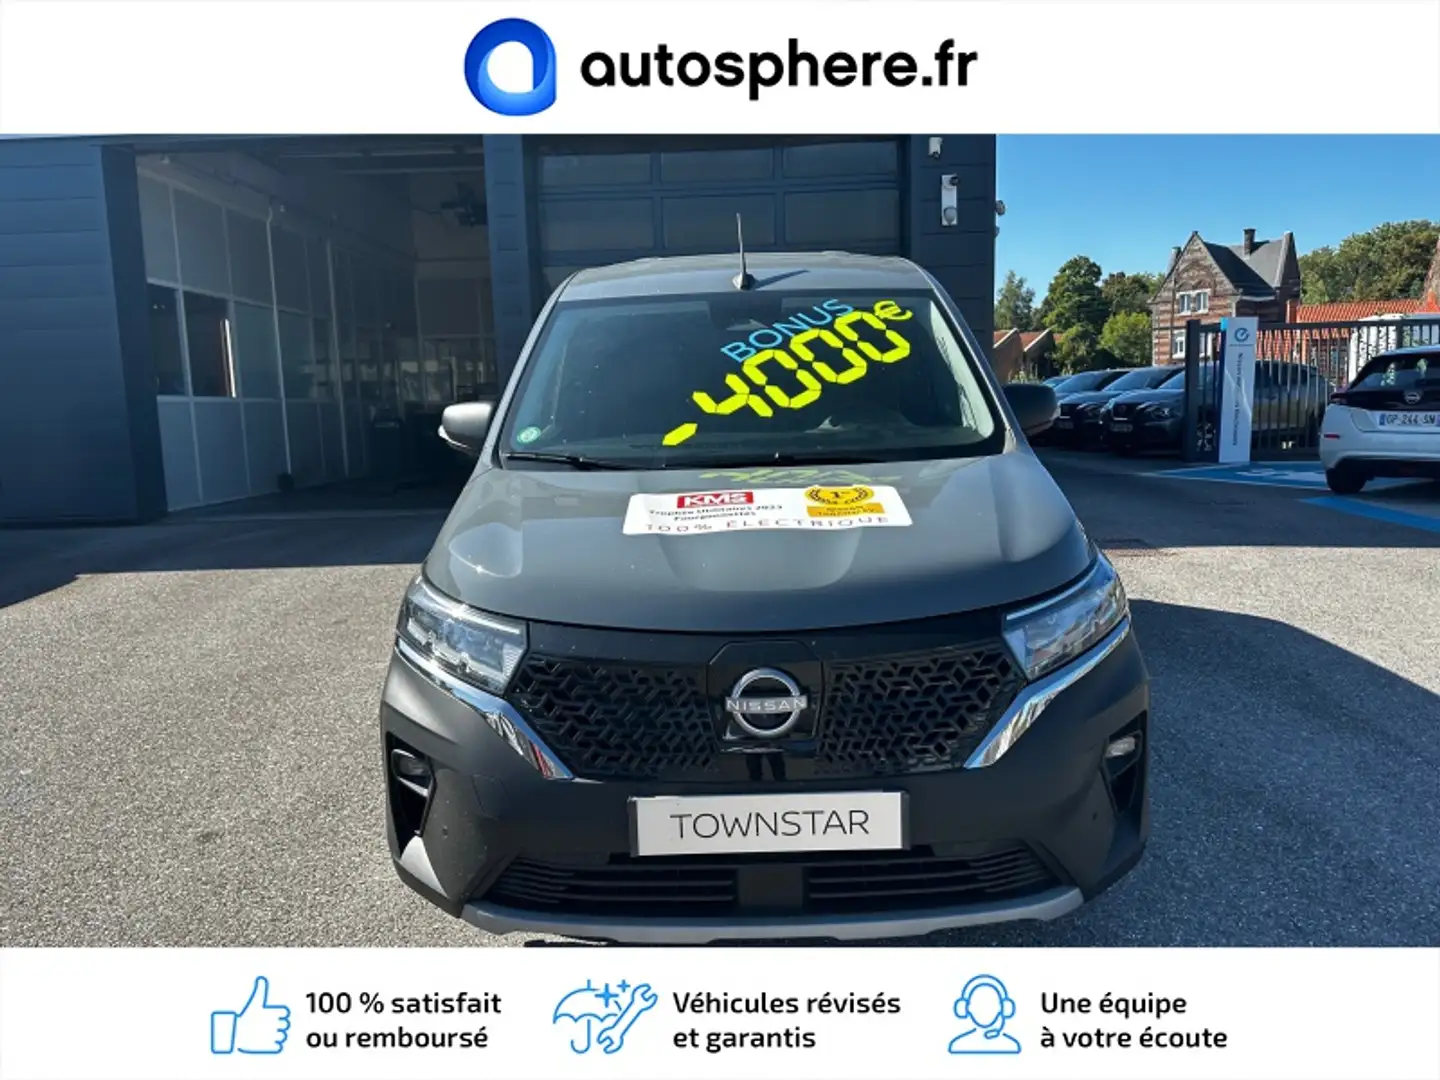 Nissan Townstar L1 EV 45 kWh N-Connecta chargeur 22 kW - 1